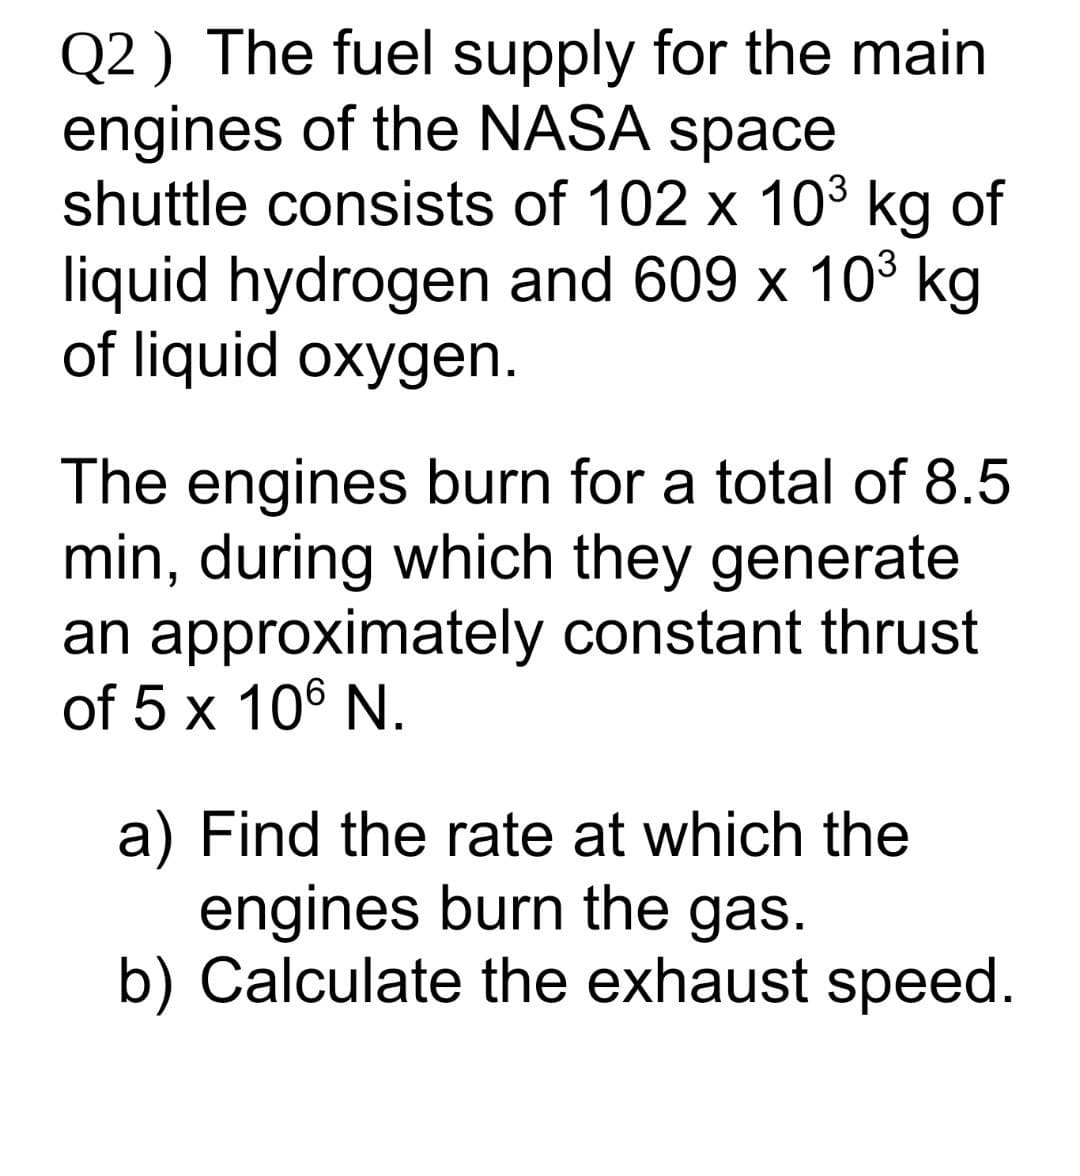 Q2 ) The fuel supply for the main
engines of the NASA space
shuttle consists of 102 x 103 kg of
liquid hydrogen and 609 x 10³ kg
of liquid oxygen.
The engines burn for a total of 8.5
min, during which they generate
an approximately constant thrust
of 5 x 106 N.
a) Find the rate at which the
engines burn the gas.
b) Calculate the exhaust speed.
